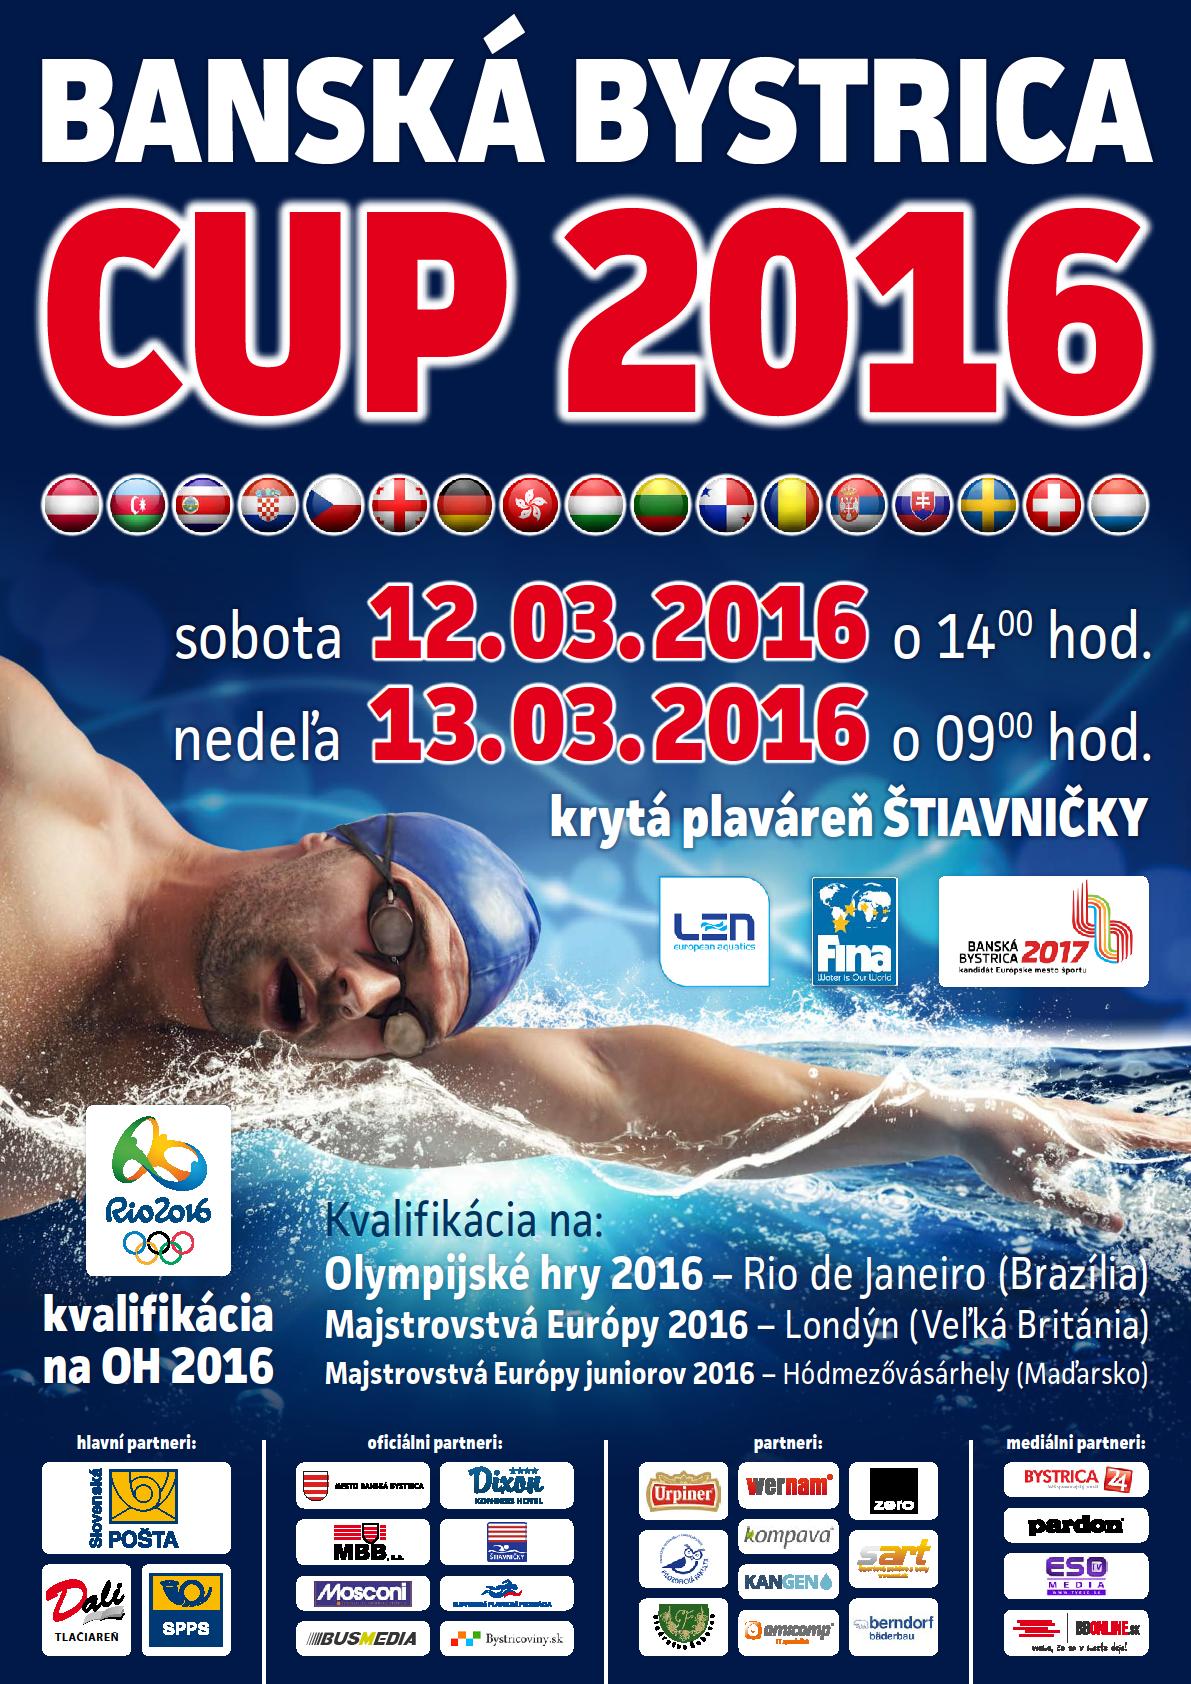 BB cup 2016